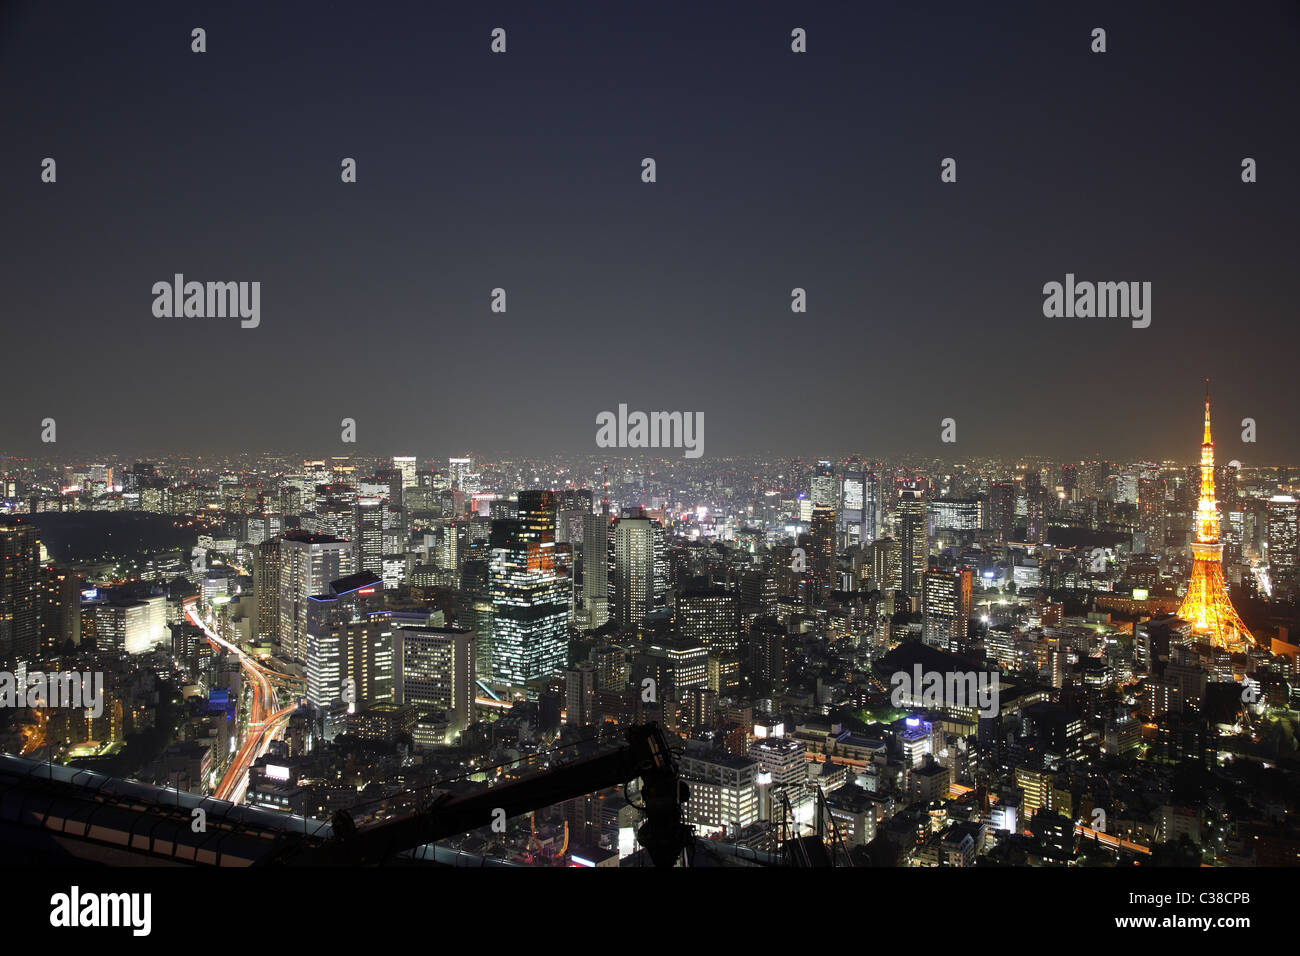 Illuminated Tokyo City in Japan at night from high above Stock Photo